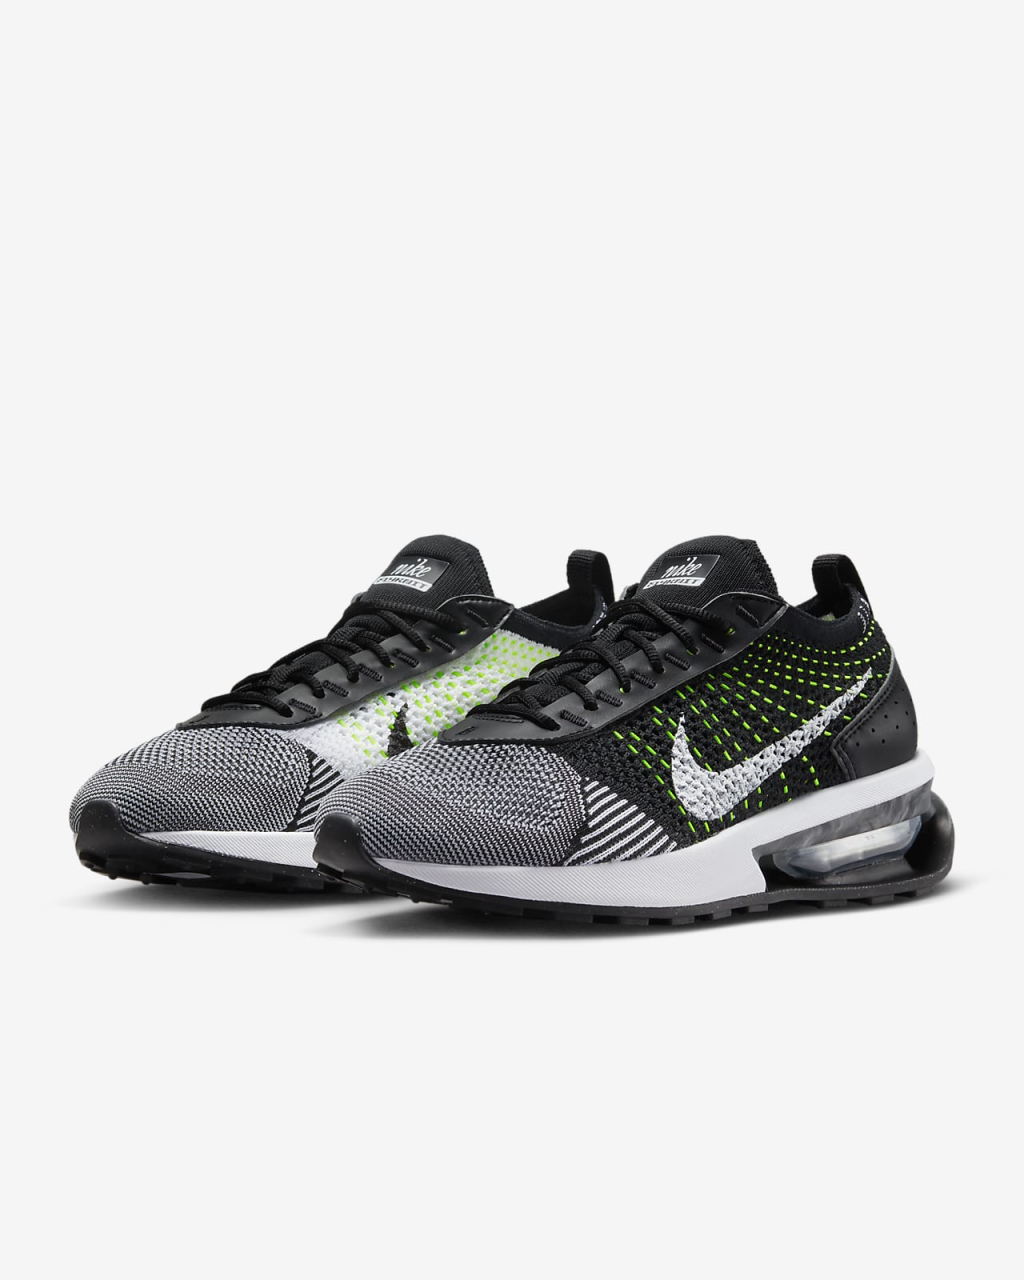 Picture of: Nike Air Max Flyknit Racer Damenschuh